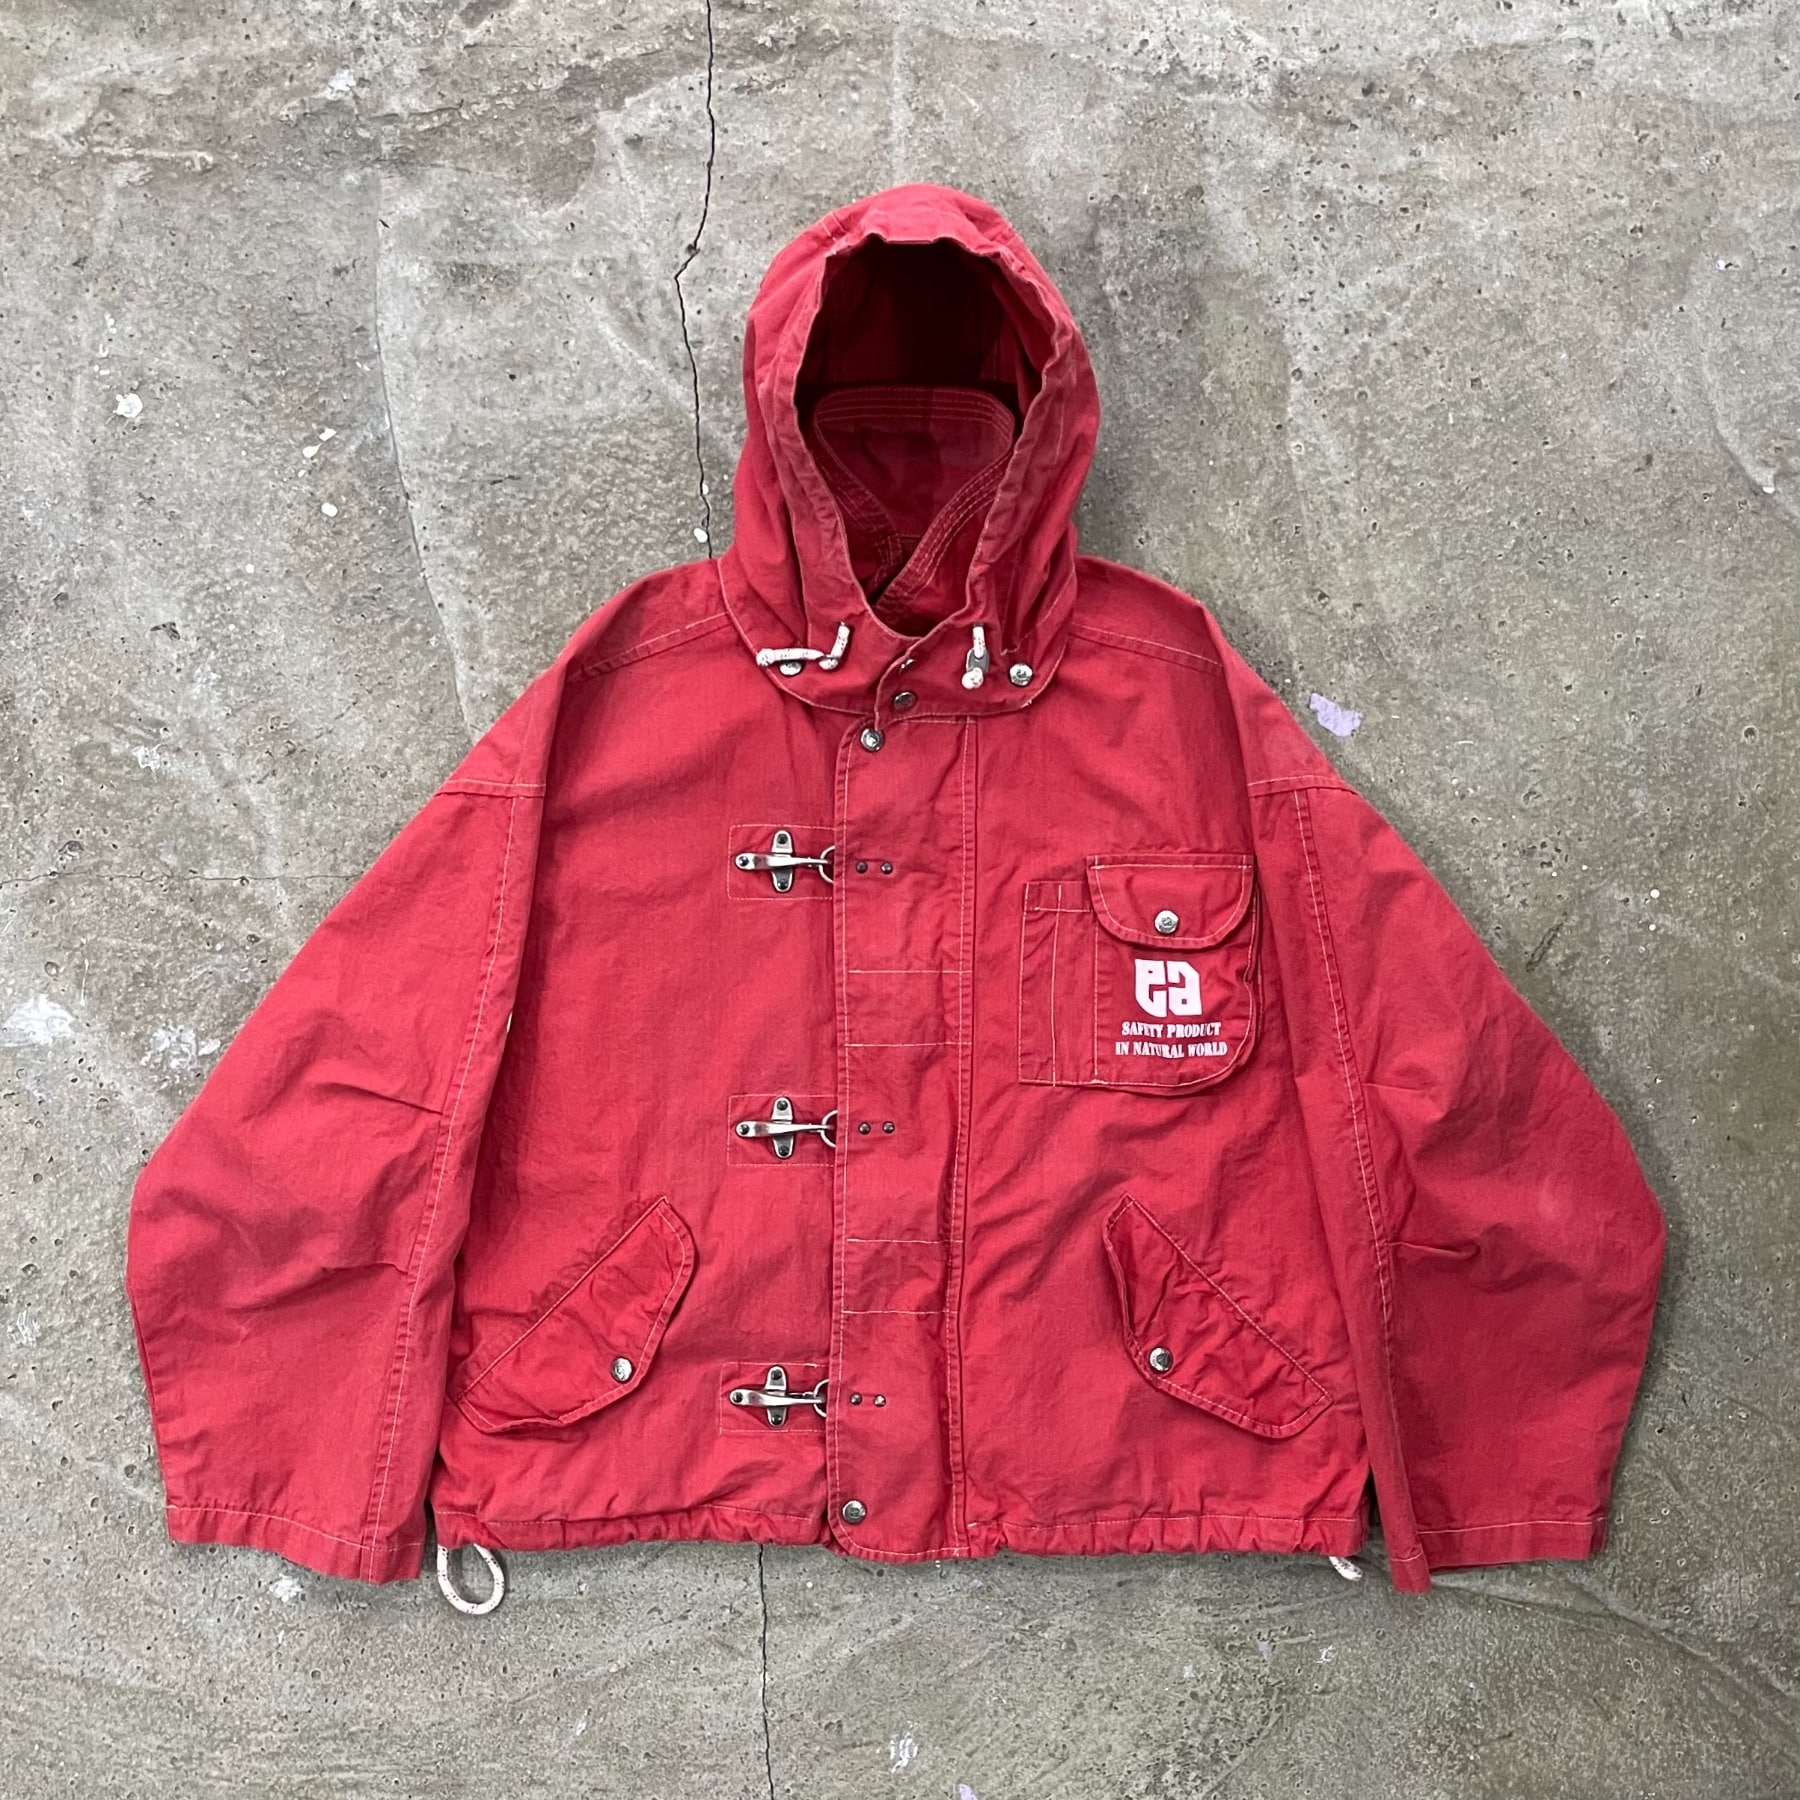 Vintage Essenza Fireman Jacket (Made in ITALY) - M (실측 XL)